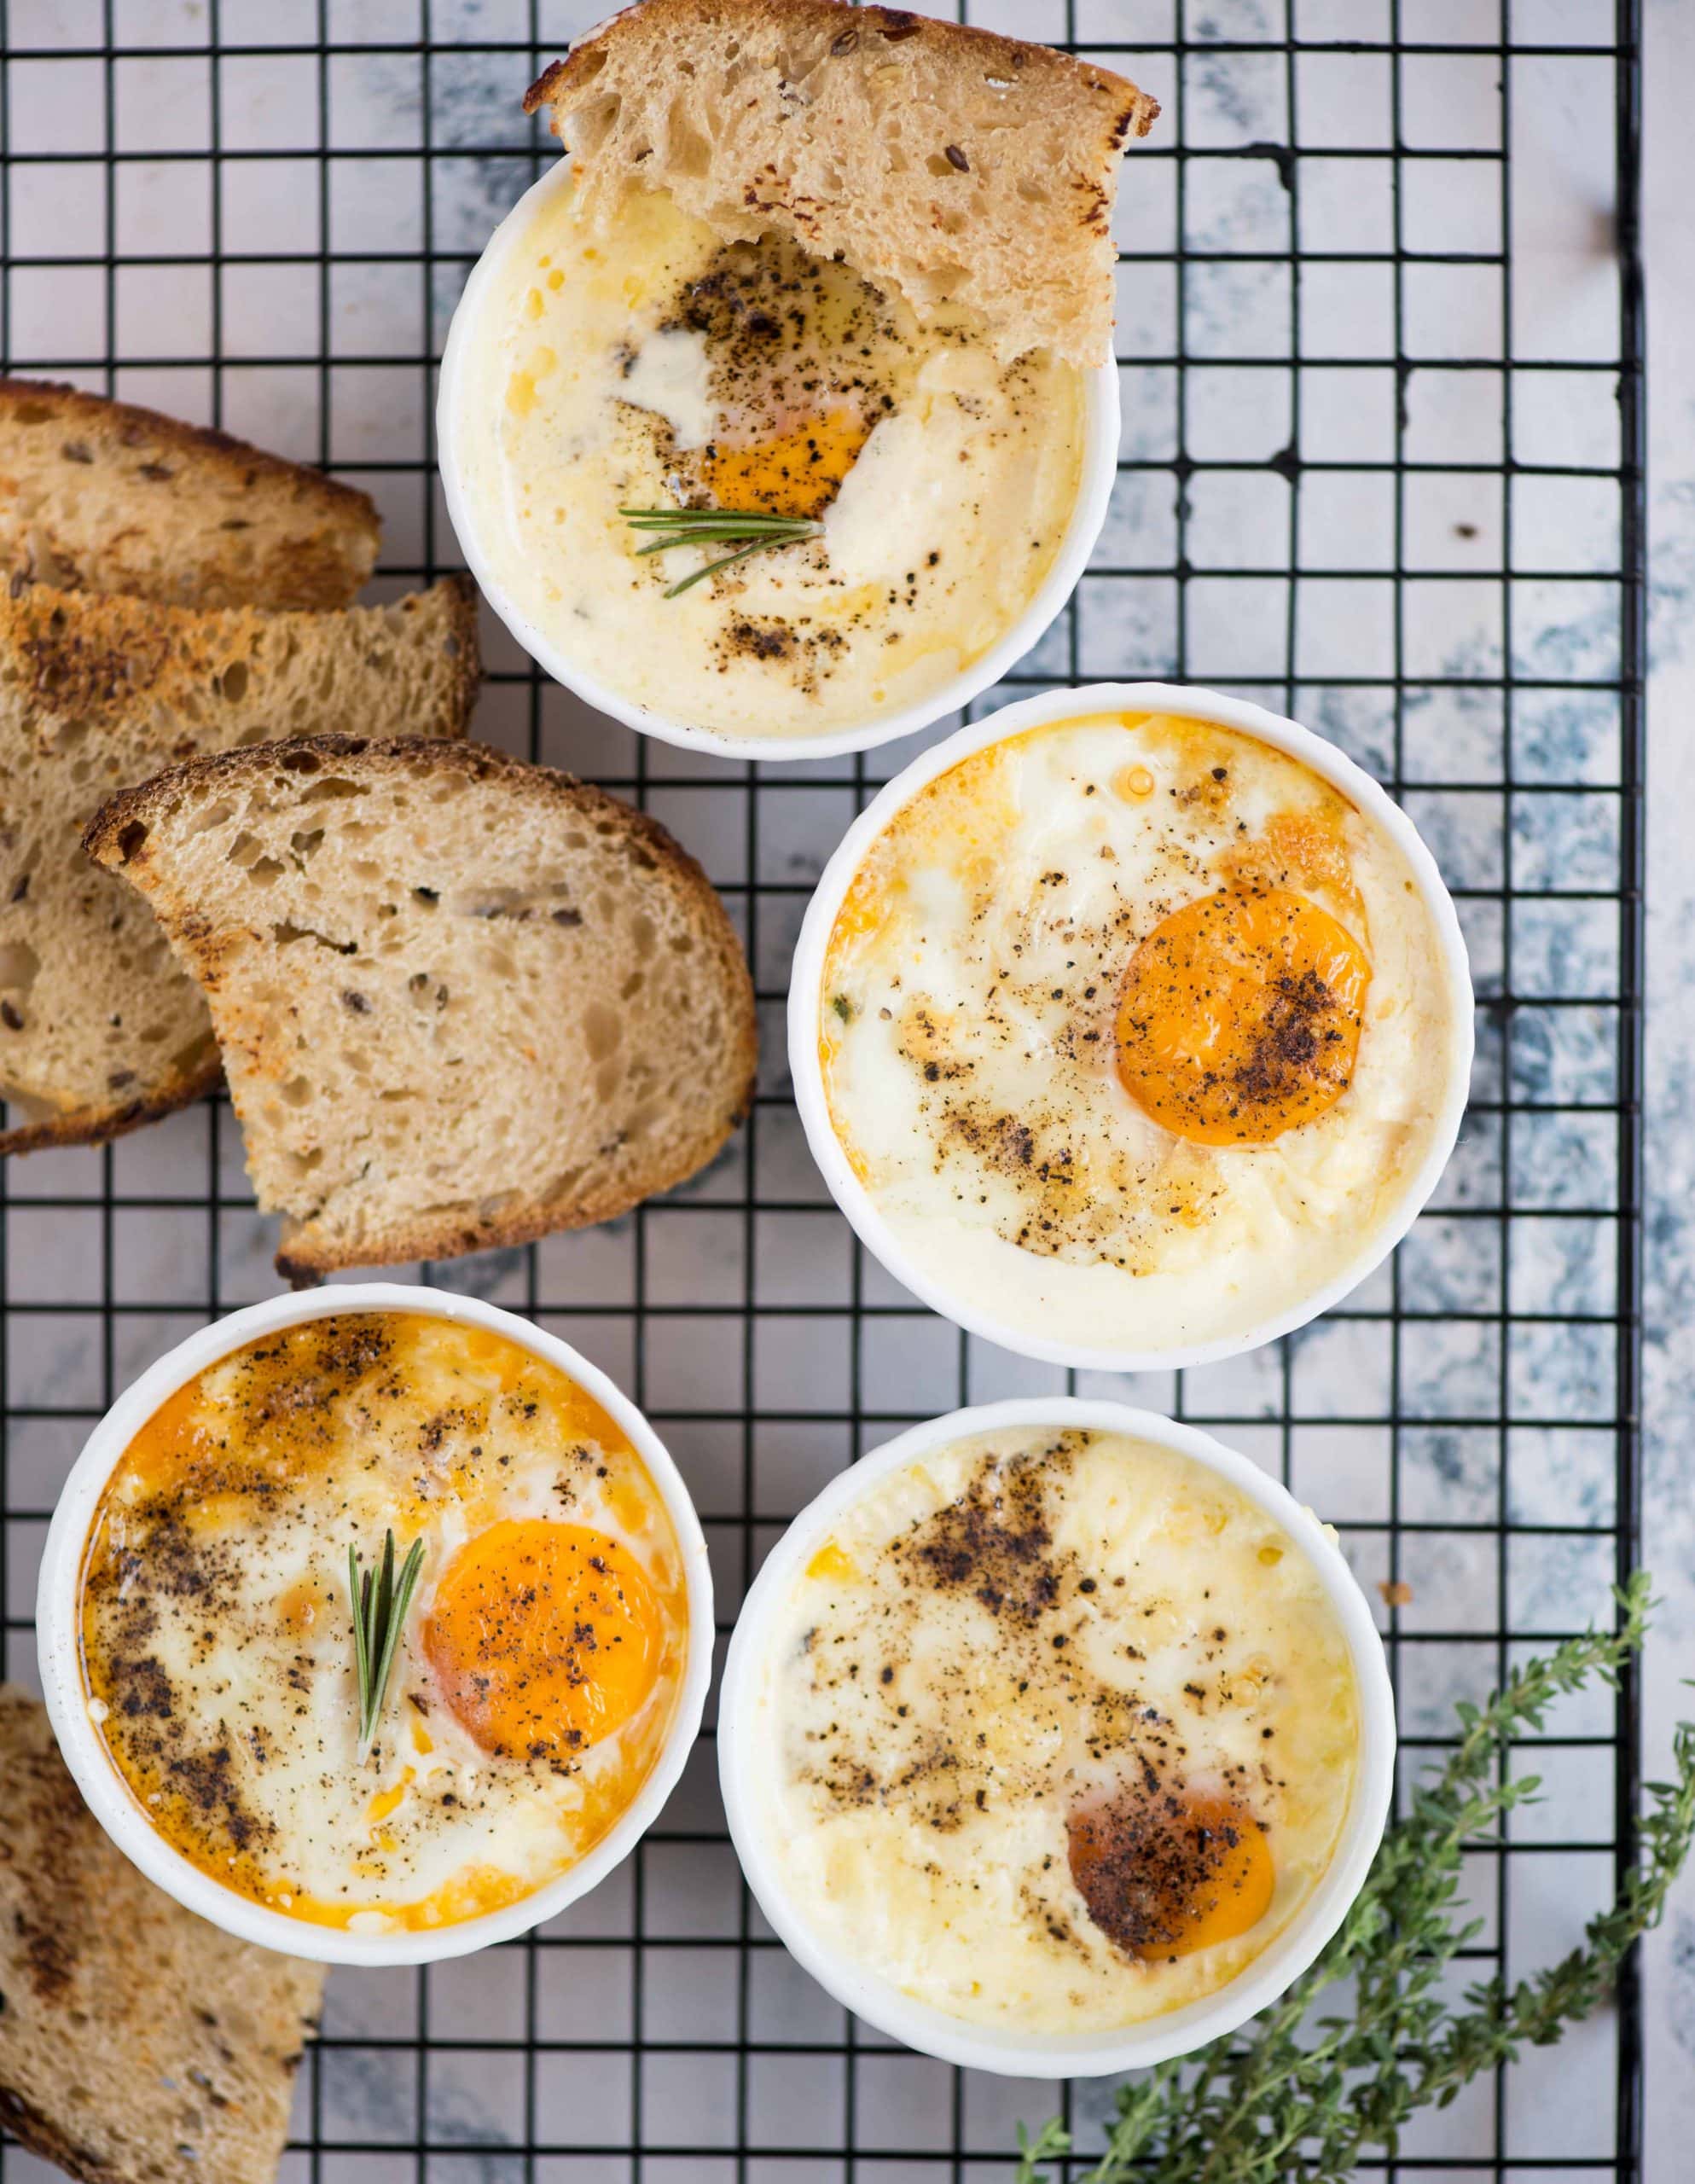 These Baked eggs with creamy gooey eggs fit perfectly as a quick breakfast or snacks. With classic creamy cheesy baked egg, I have also shared interesting variations of oven baked eggs.